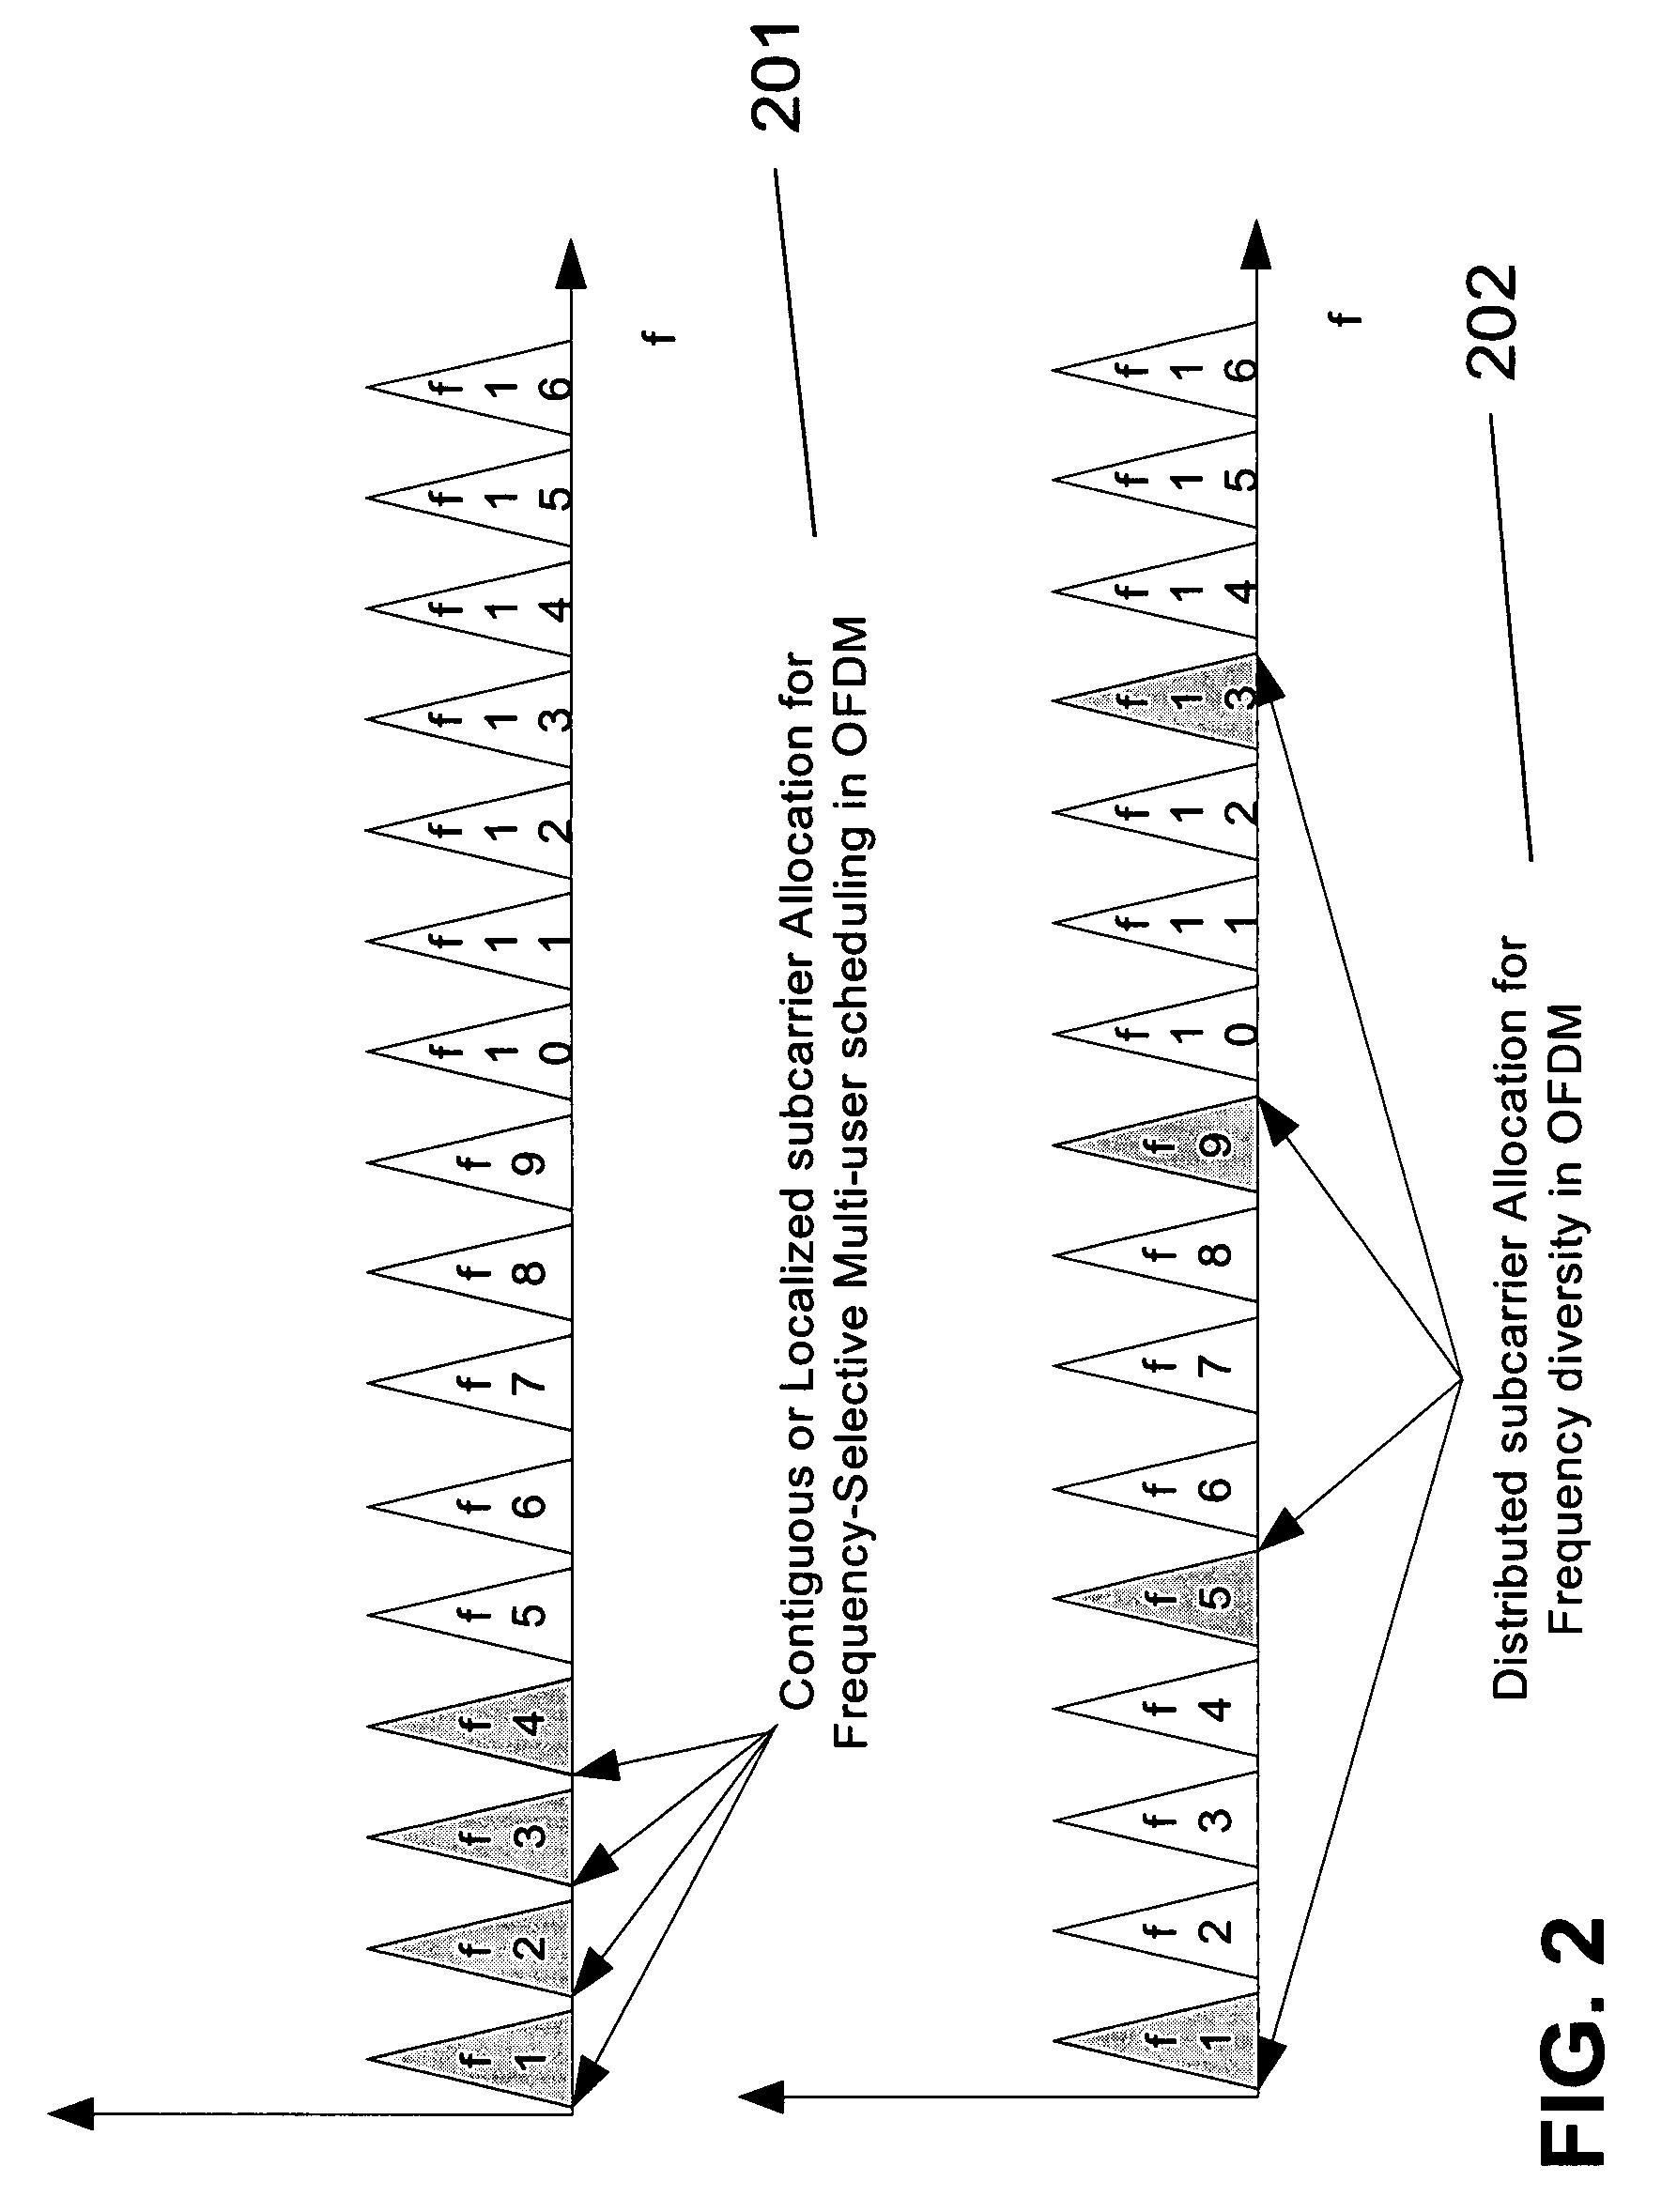 Multi-user MIMO feedback and transmission in a wireless communication system